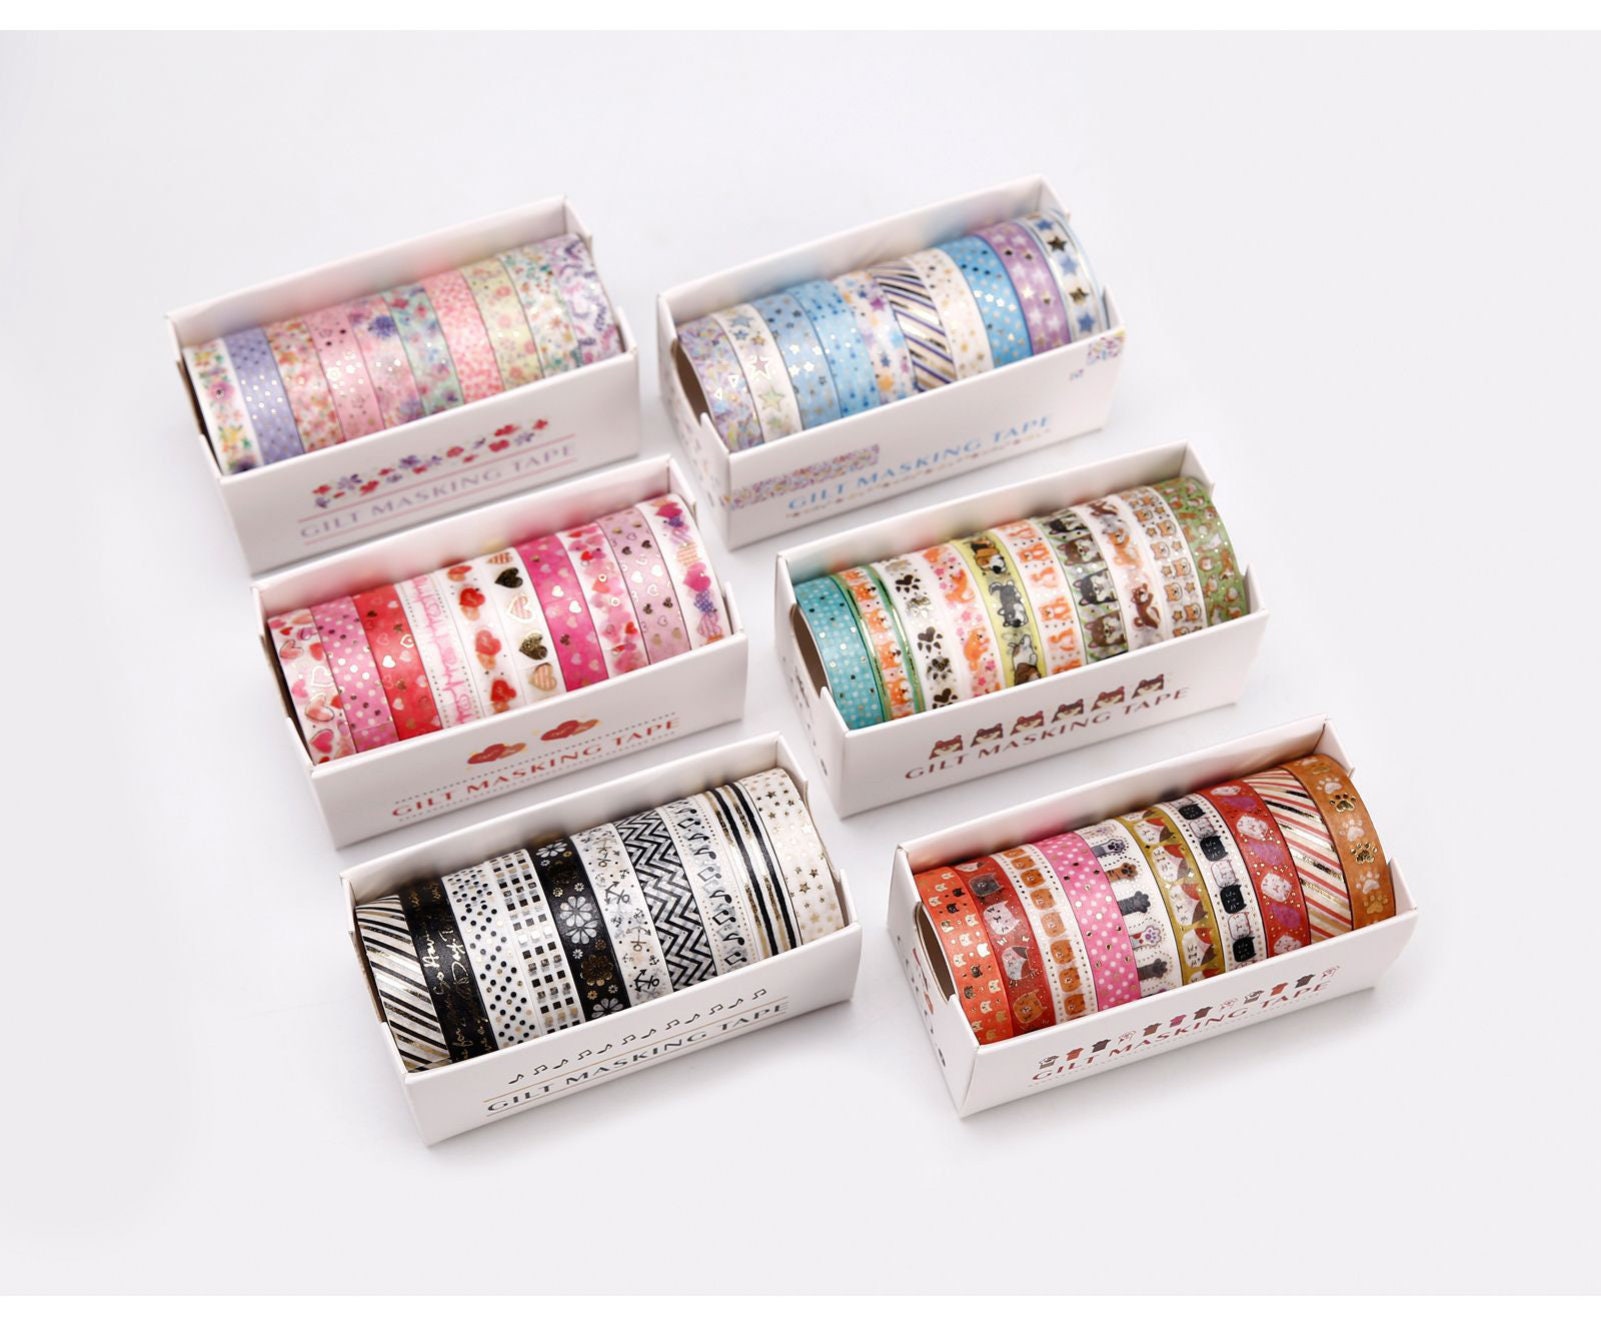 ❄️ Silver foiled Cozy Winter washi tape rolls available in the